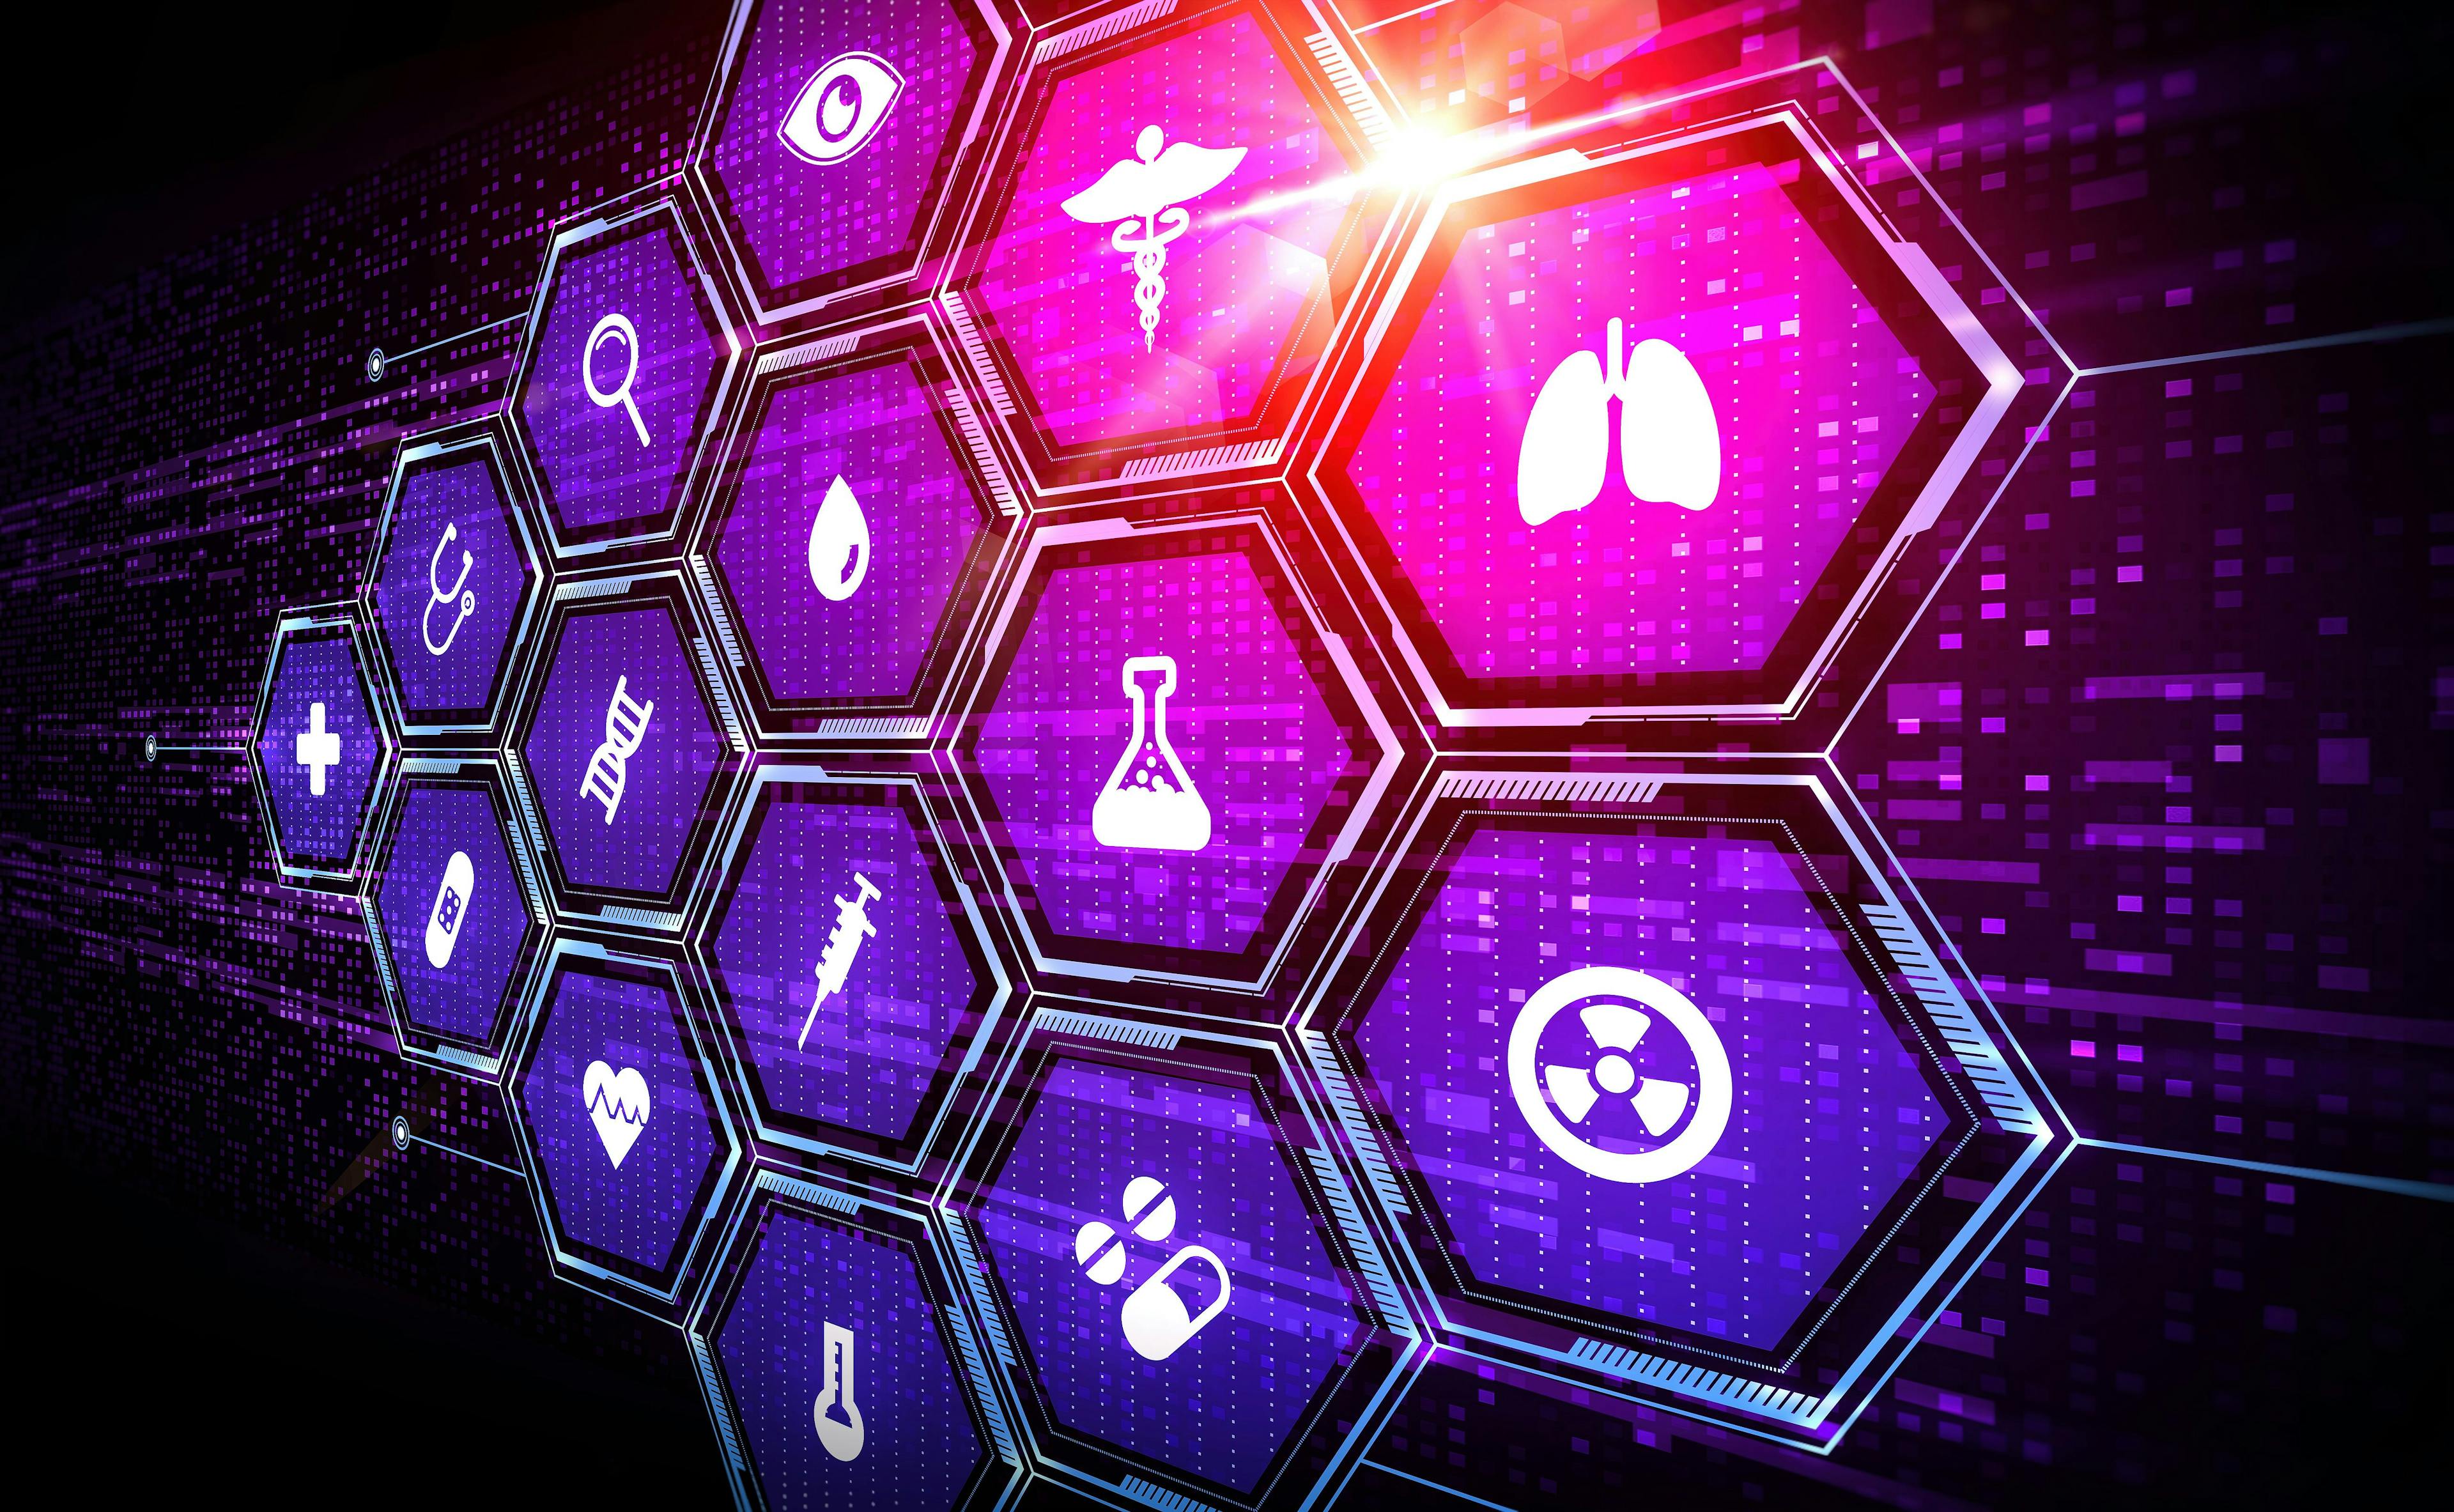 Healthcare Technology and Healthcare Science Concept - Innovation in Health and Life Sciences - Illustration with Medical Icons